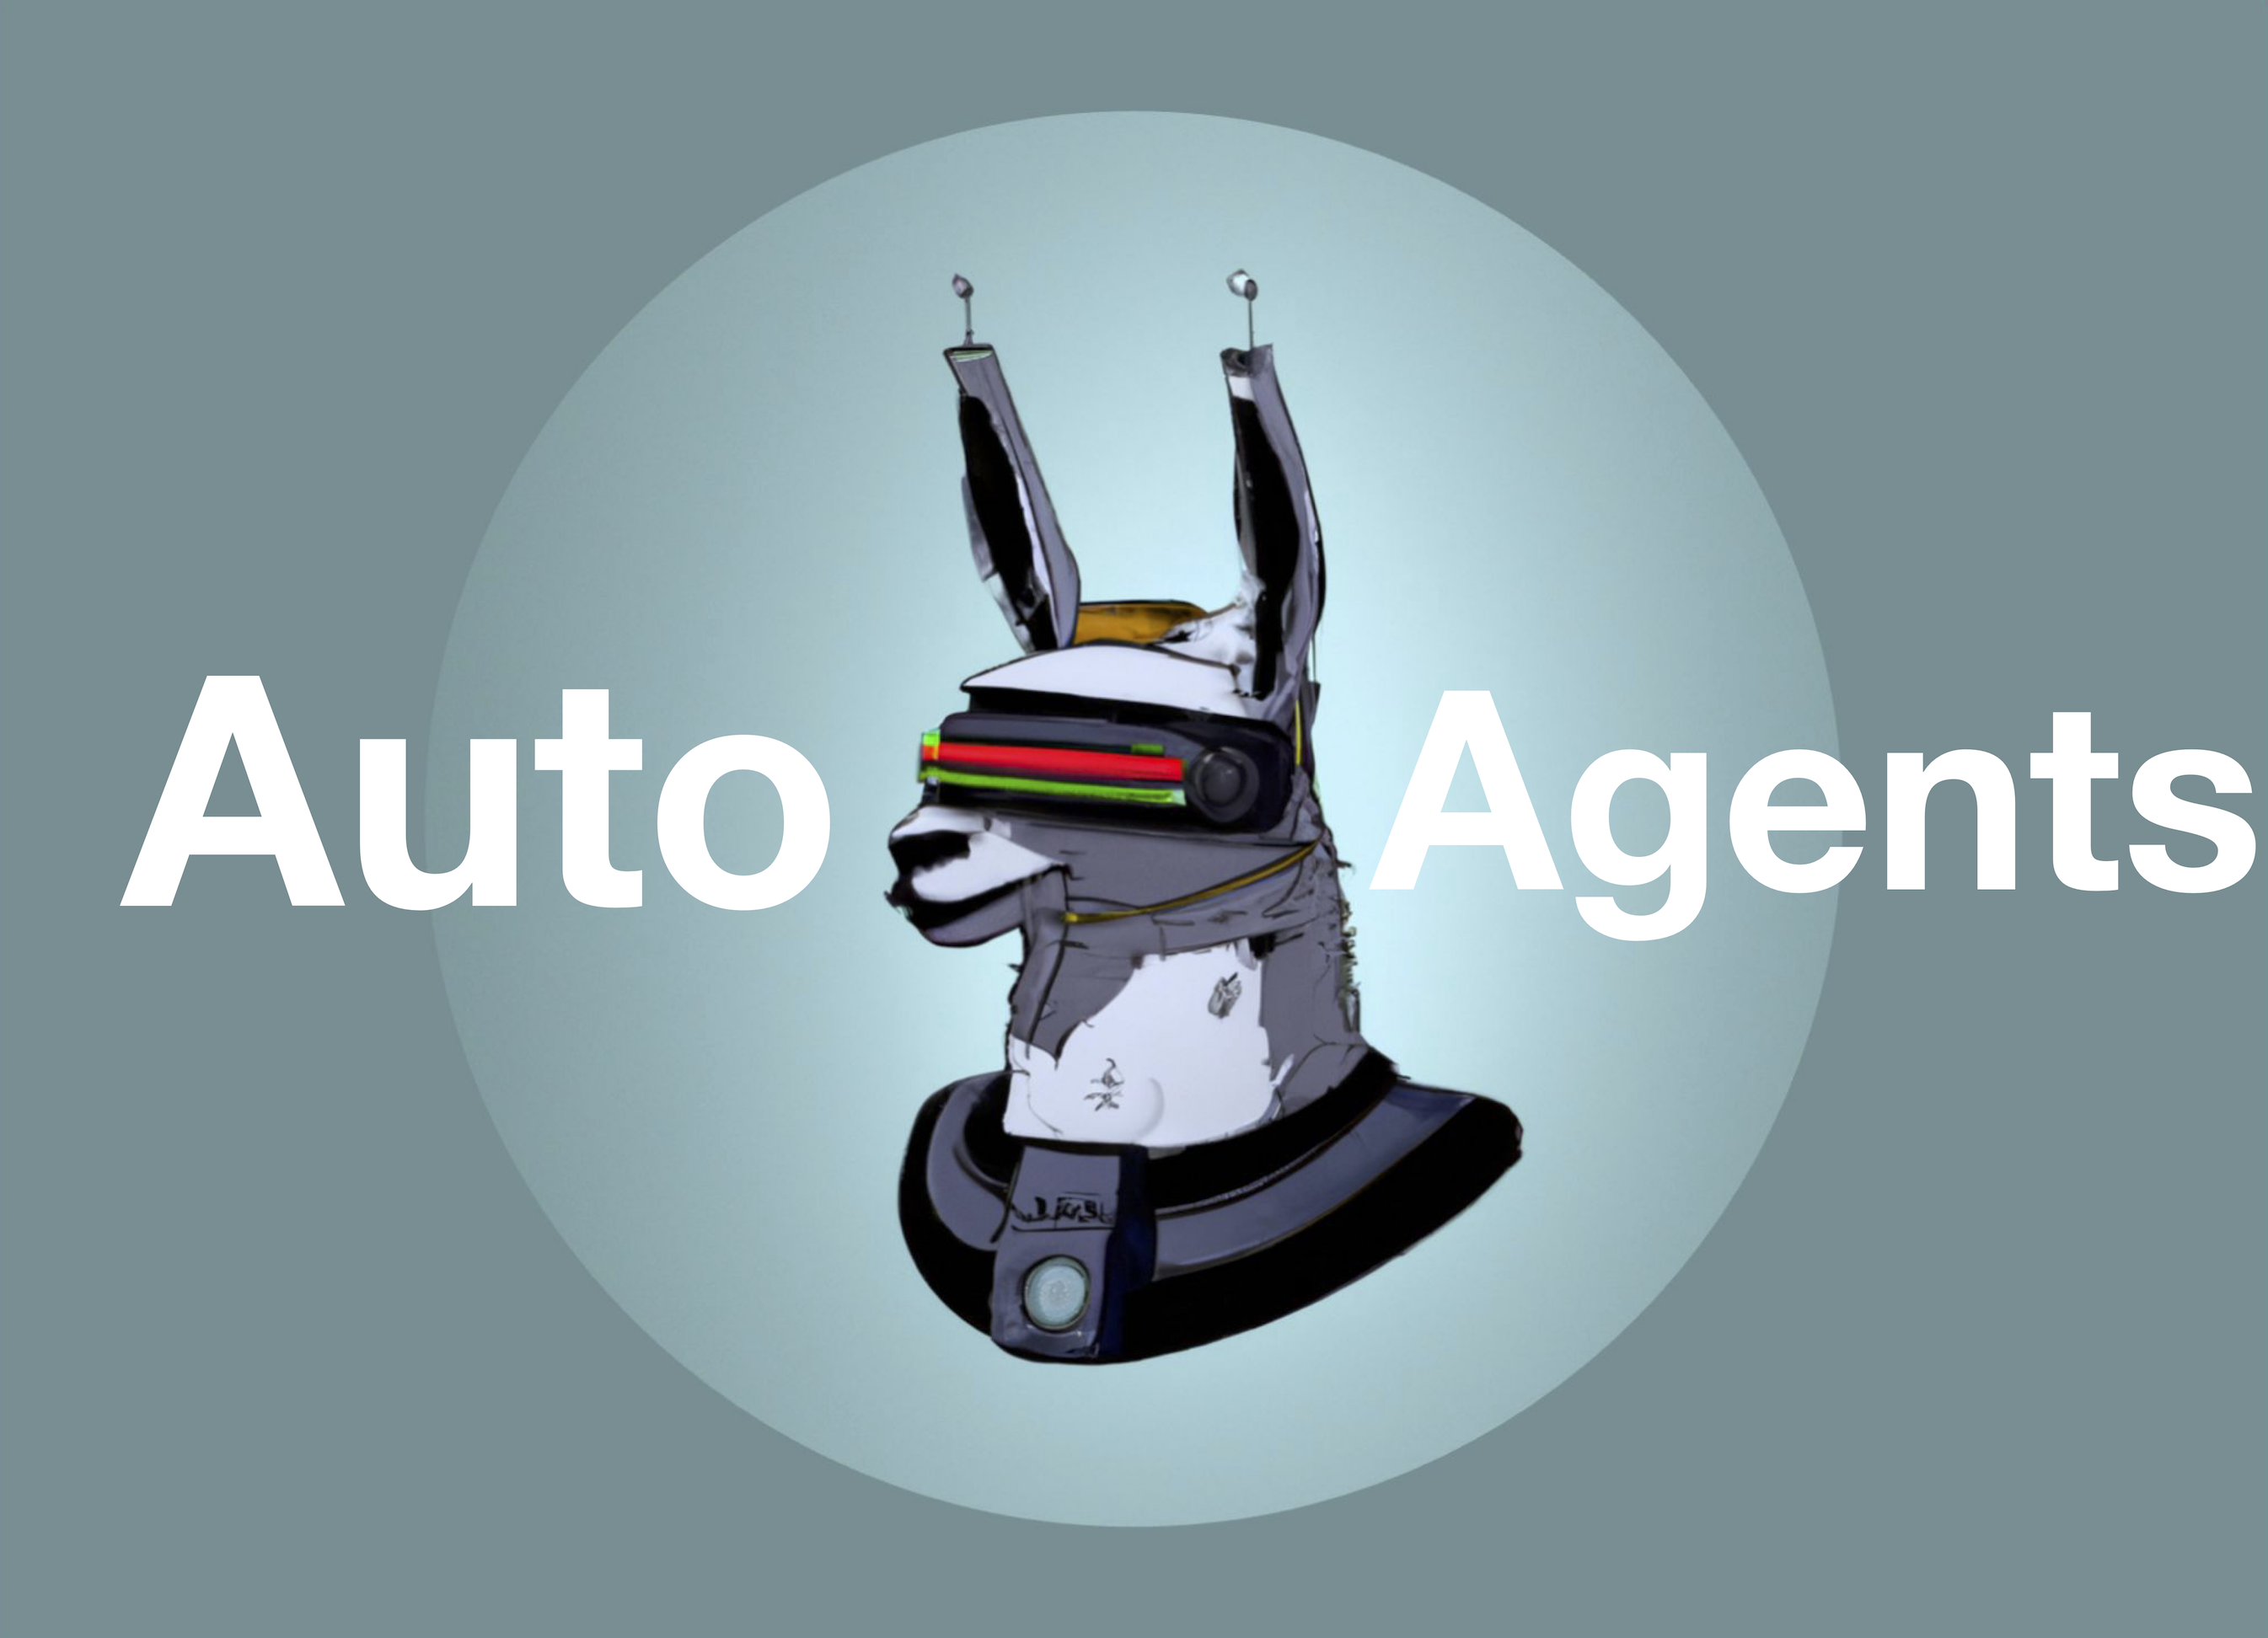 The AutoAgents Project.